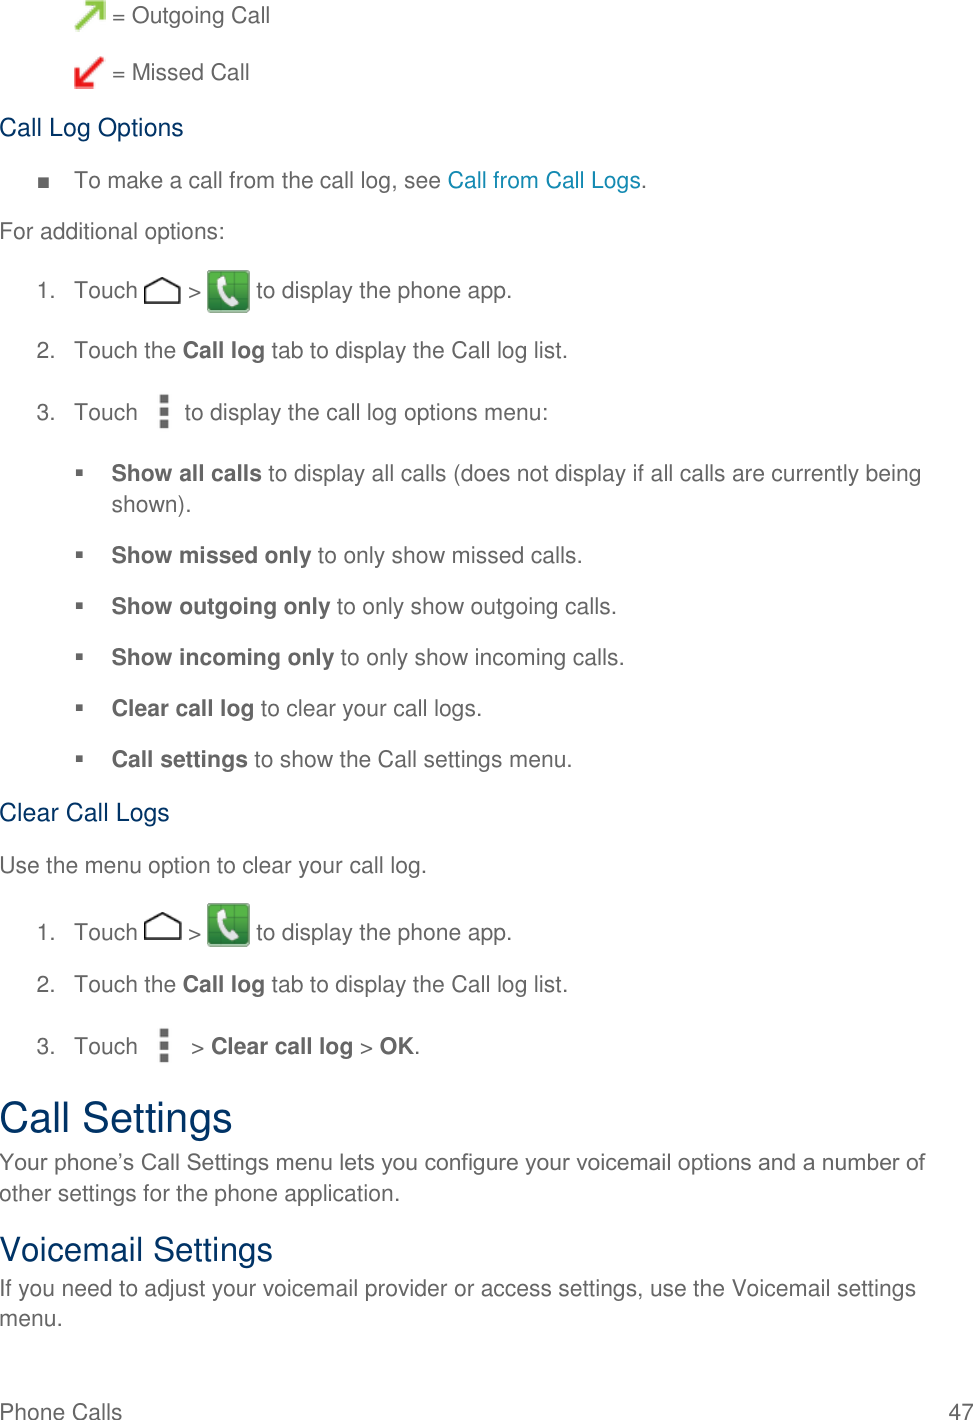 Phone Calls   47  = Outgoing Call  = Missed Call Call Log Options ■  To make a call from the call log, see Call from Call Logs. For additional options: 1.  Touch   &gt;   to display the phone app. 2.  Touch the Call log tab to display the Call log list. 3.  Touch  to display the call log options menu:  Show all calls to display all calls (does not display if all calls are currently being shown).  Show missed only to only show missed calls.  Show outgoing only to only show outgoing calls.  Show incoming only to only show incoming calls.  Clear call log to clear your call logs.  Call settings to show the Call settings menu. Clear Call Logs Use the menu option to clear your call log. 1.  Touch   &gt;   to display the phone app. 2.  Touch the Call log tab to display the Call log list. 3.  Touch   &gt; Clear call log &gt; OK. Call Settings Your phone’s Call Settings menu lets you configure your voicemail options and a number of other settings for the phone application. Voicemail Settings If you need to adjust your voicemail provider or access settings, use the Voicemail settings menu. 